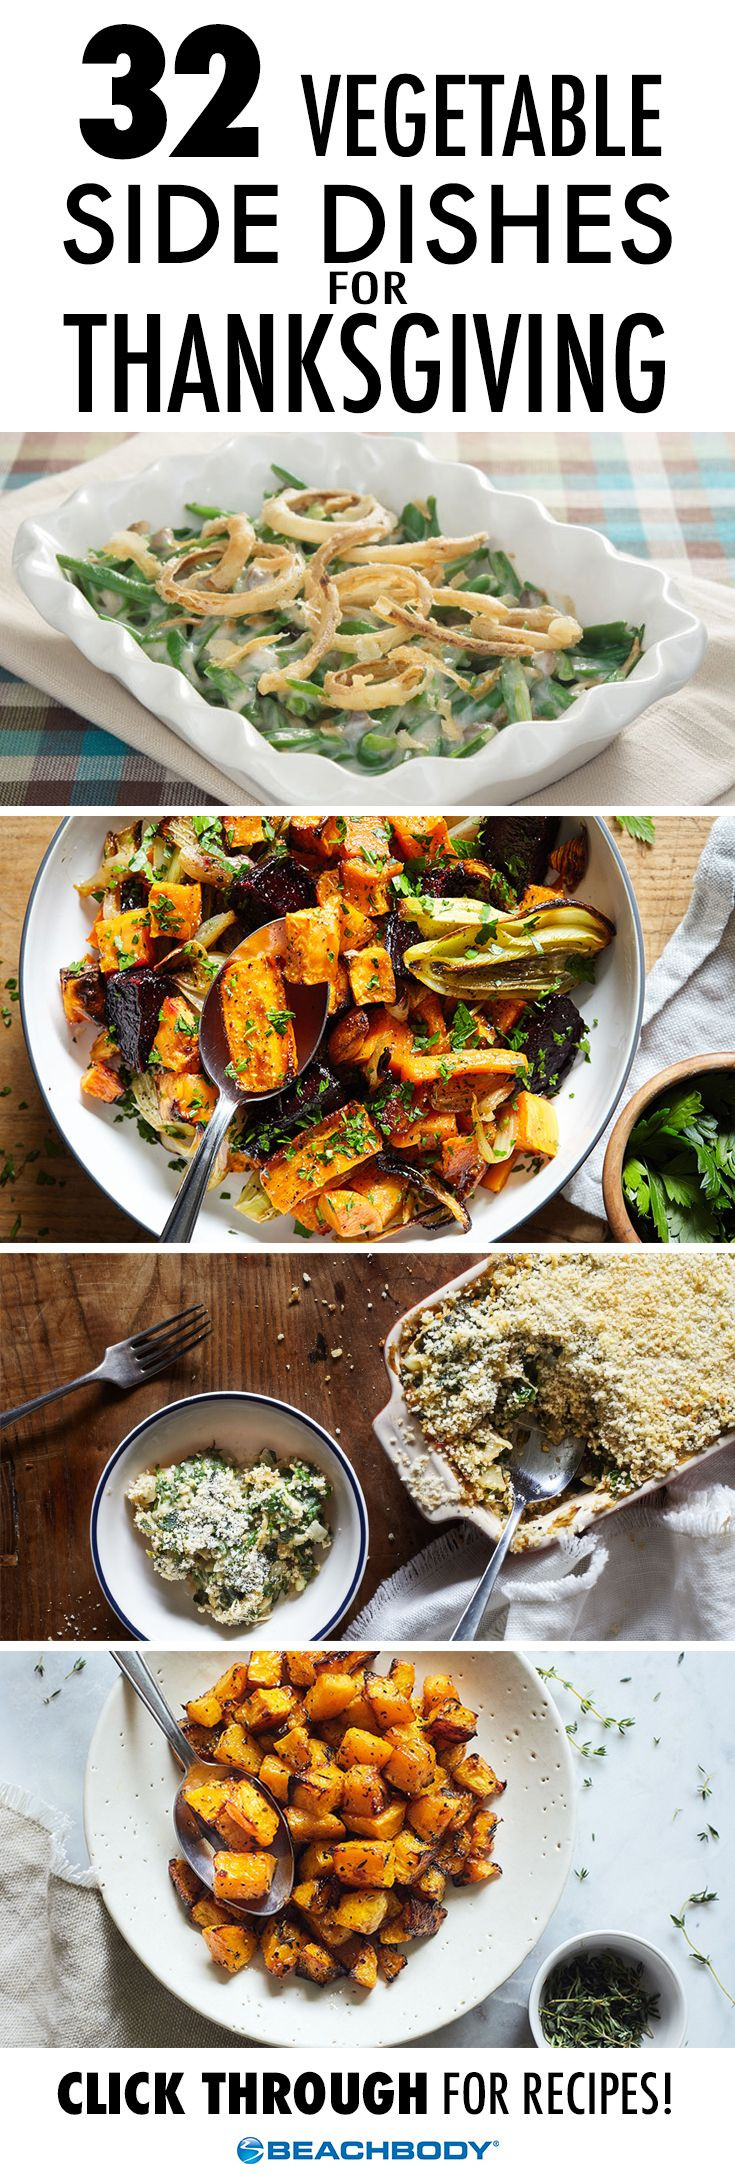 Vegetable Side Dishes For Thanksgiving
 837 best images about Healthy Recipes on Pinterest